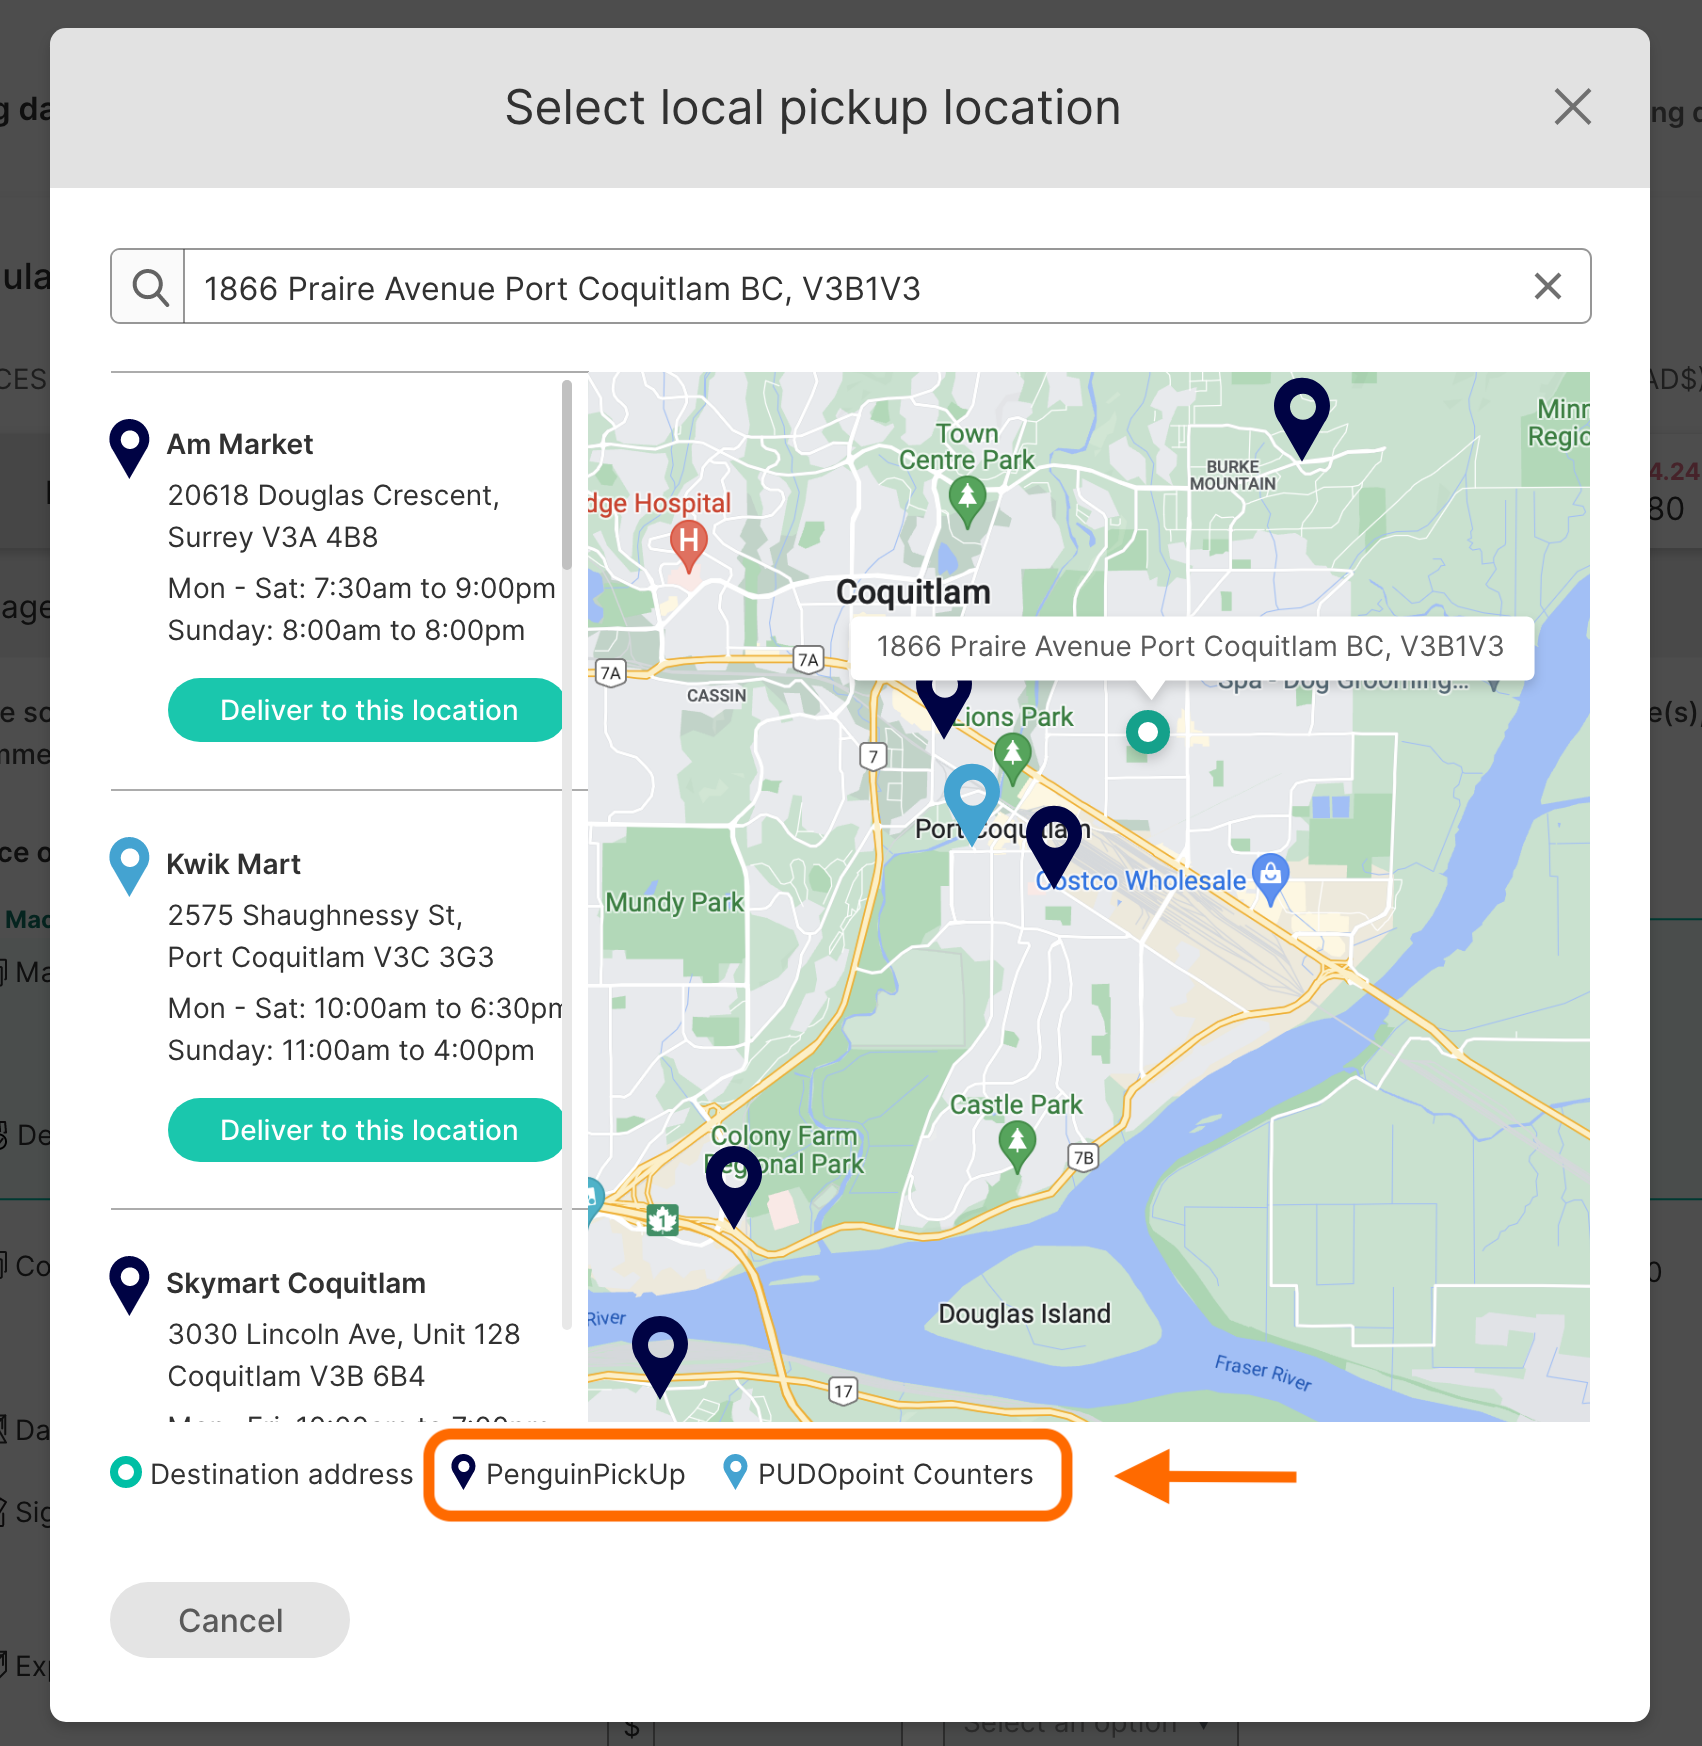 PenguinPickUp and PUDO location page